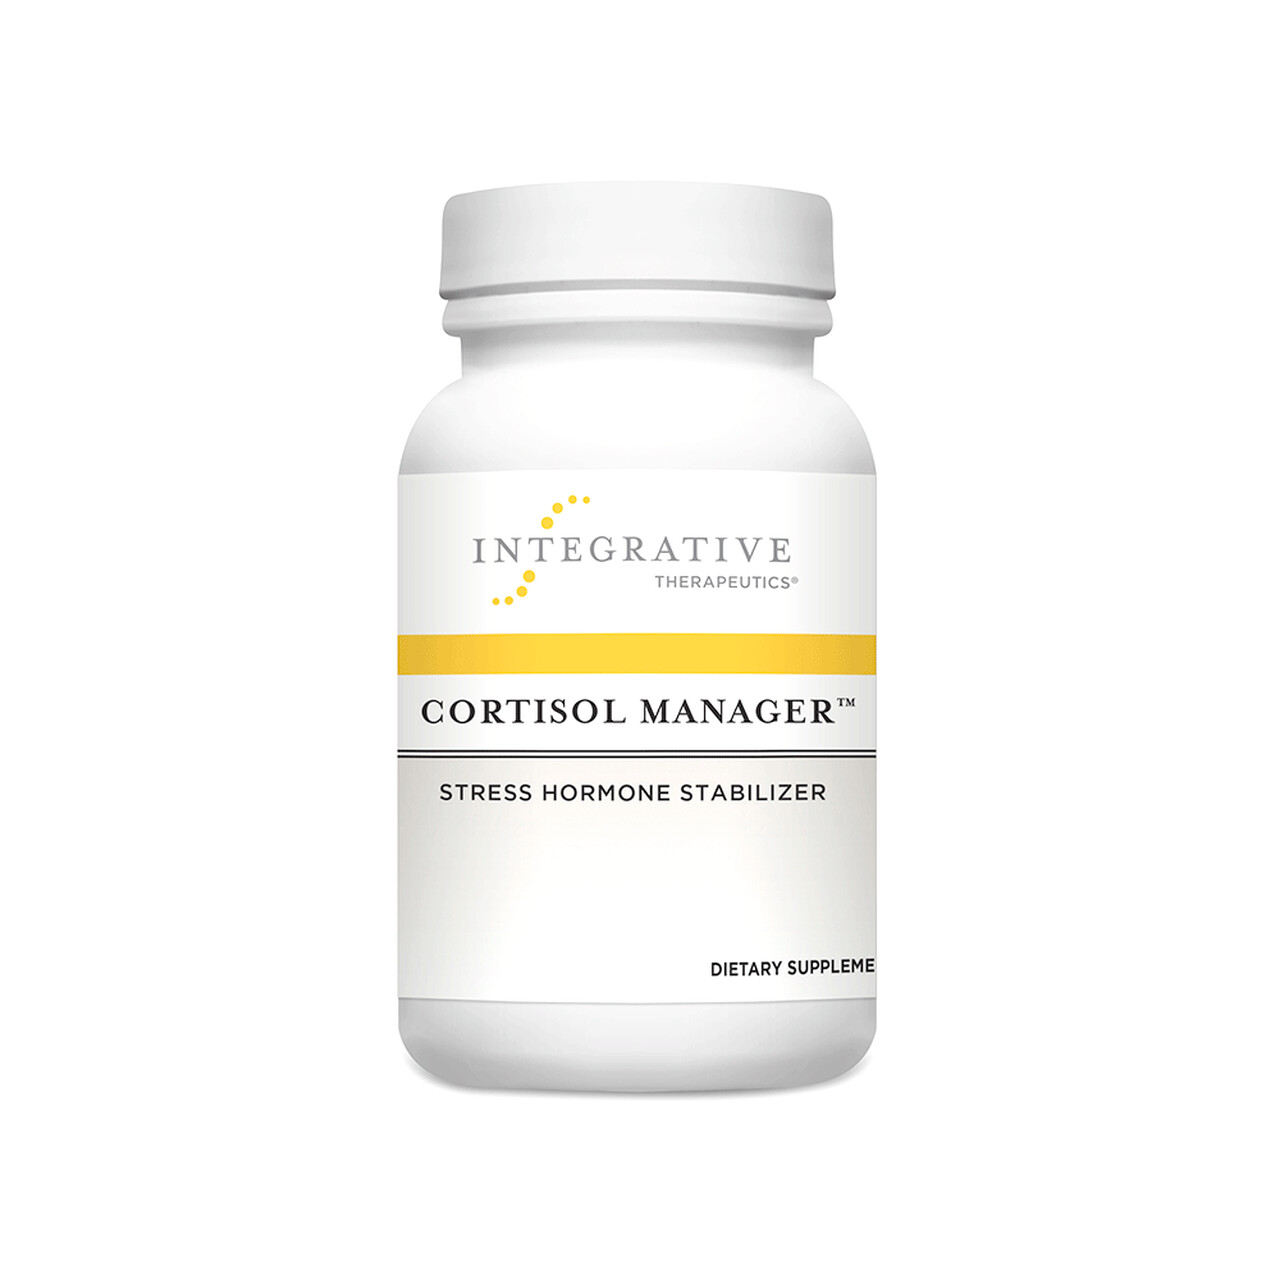 INTEGRATIVE THERAPUETICS — CORTISOL MANAGER